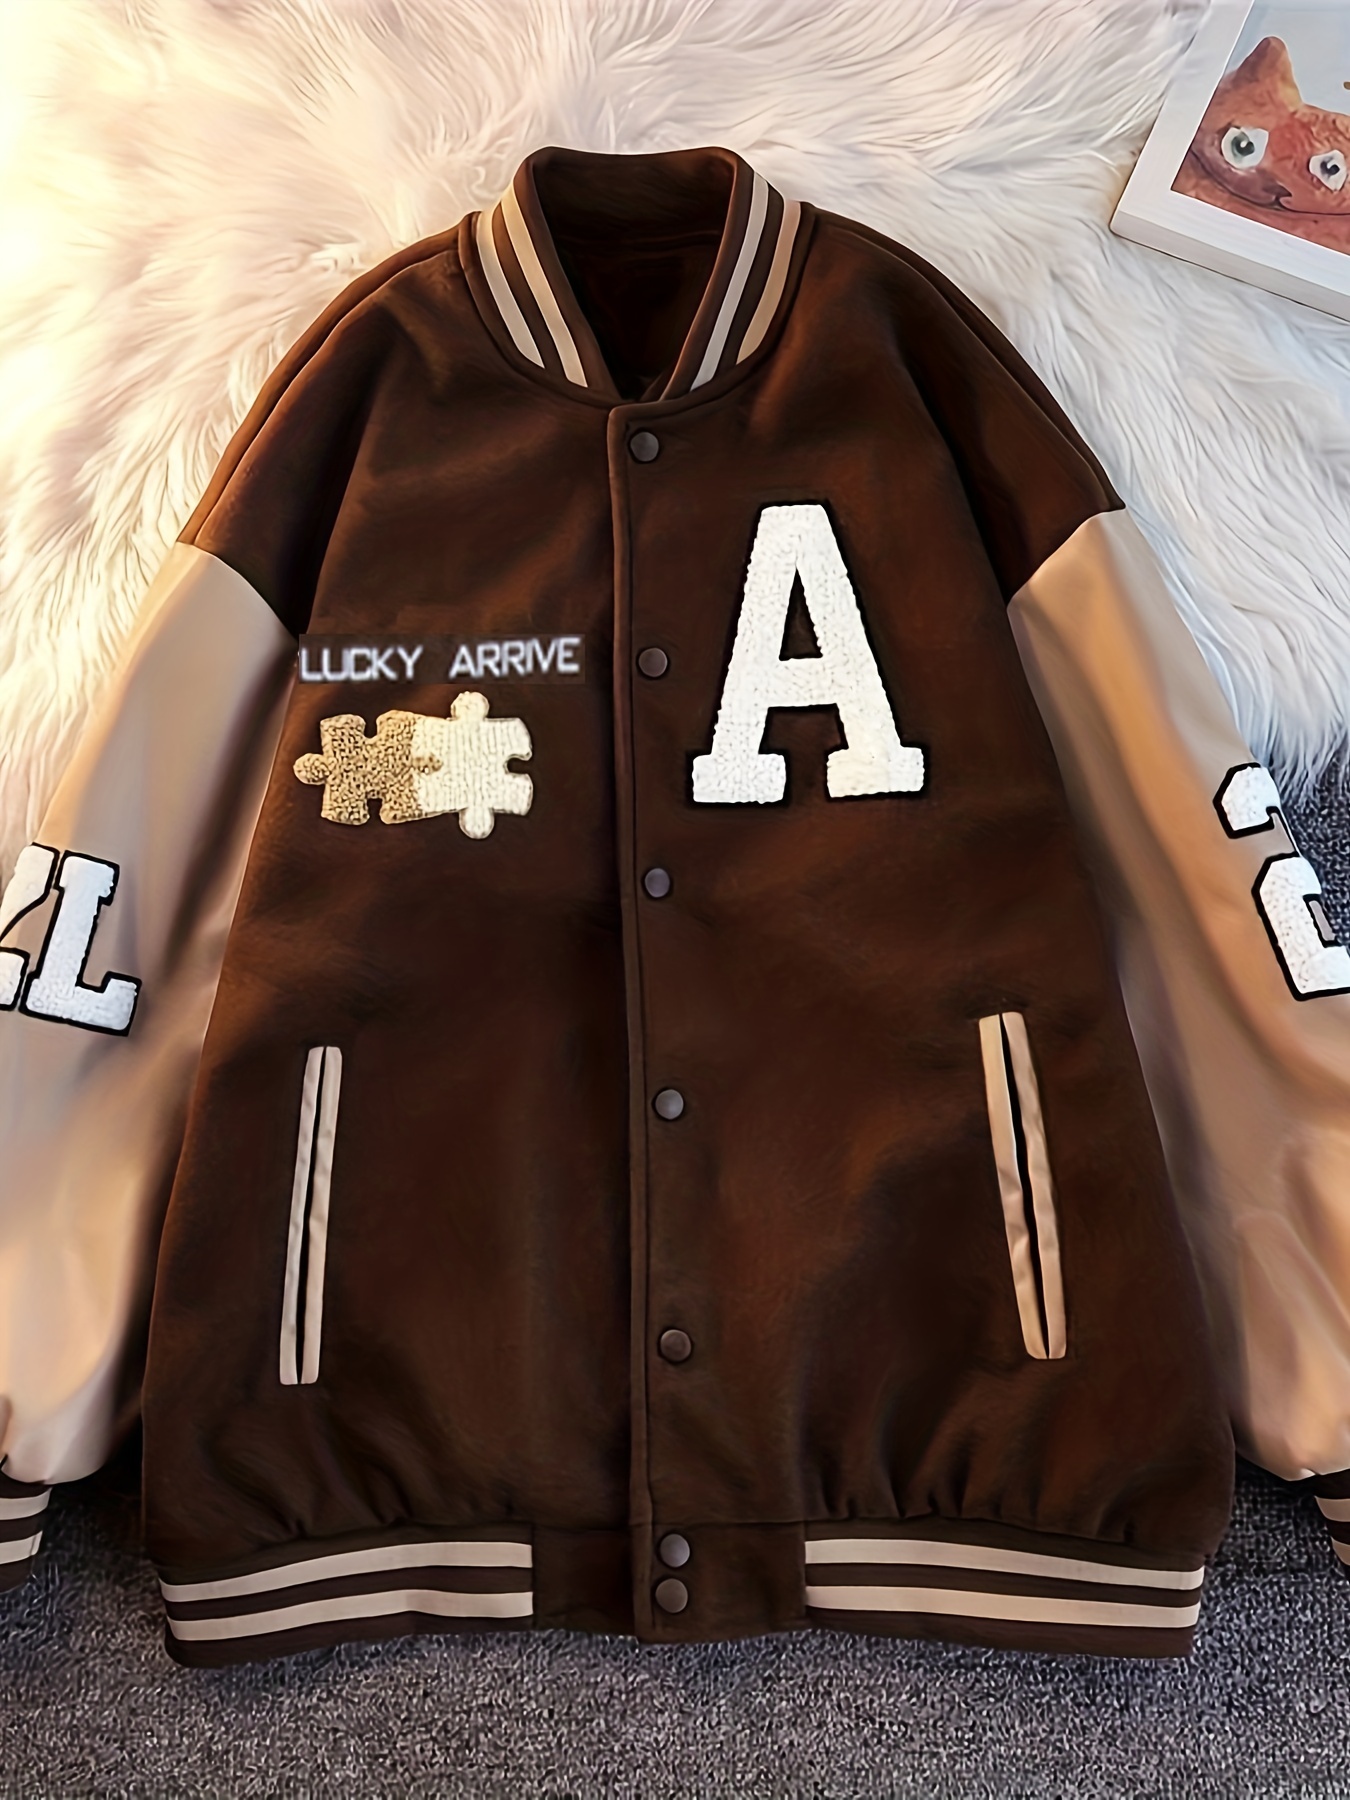 How to repurpose letterman jacket patches! 